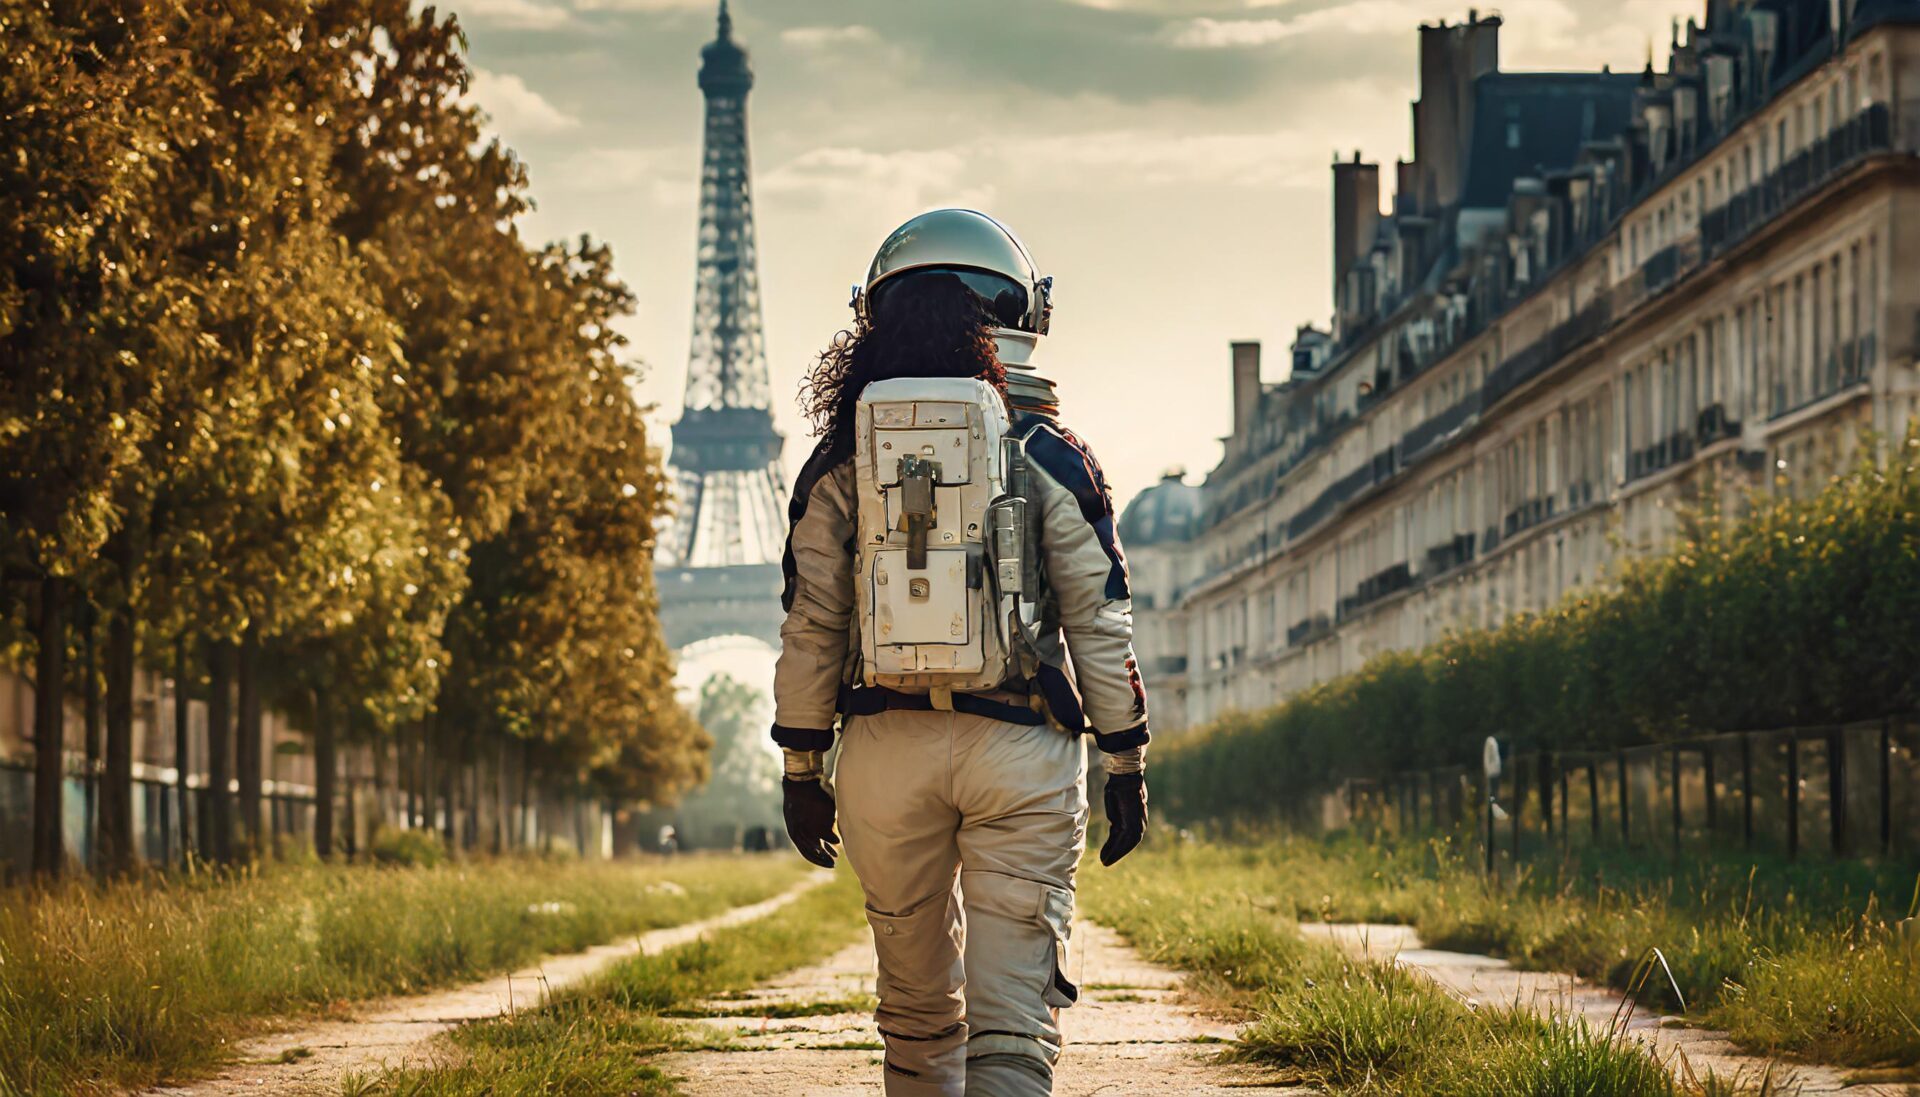 Firefly An Image Showing A Cosmonaut From The Back, Walking On The Champs Élysées In Paris, In A Pos 3